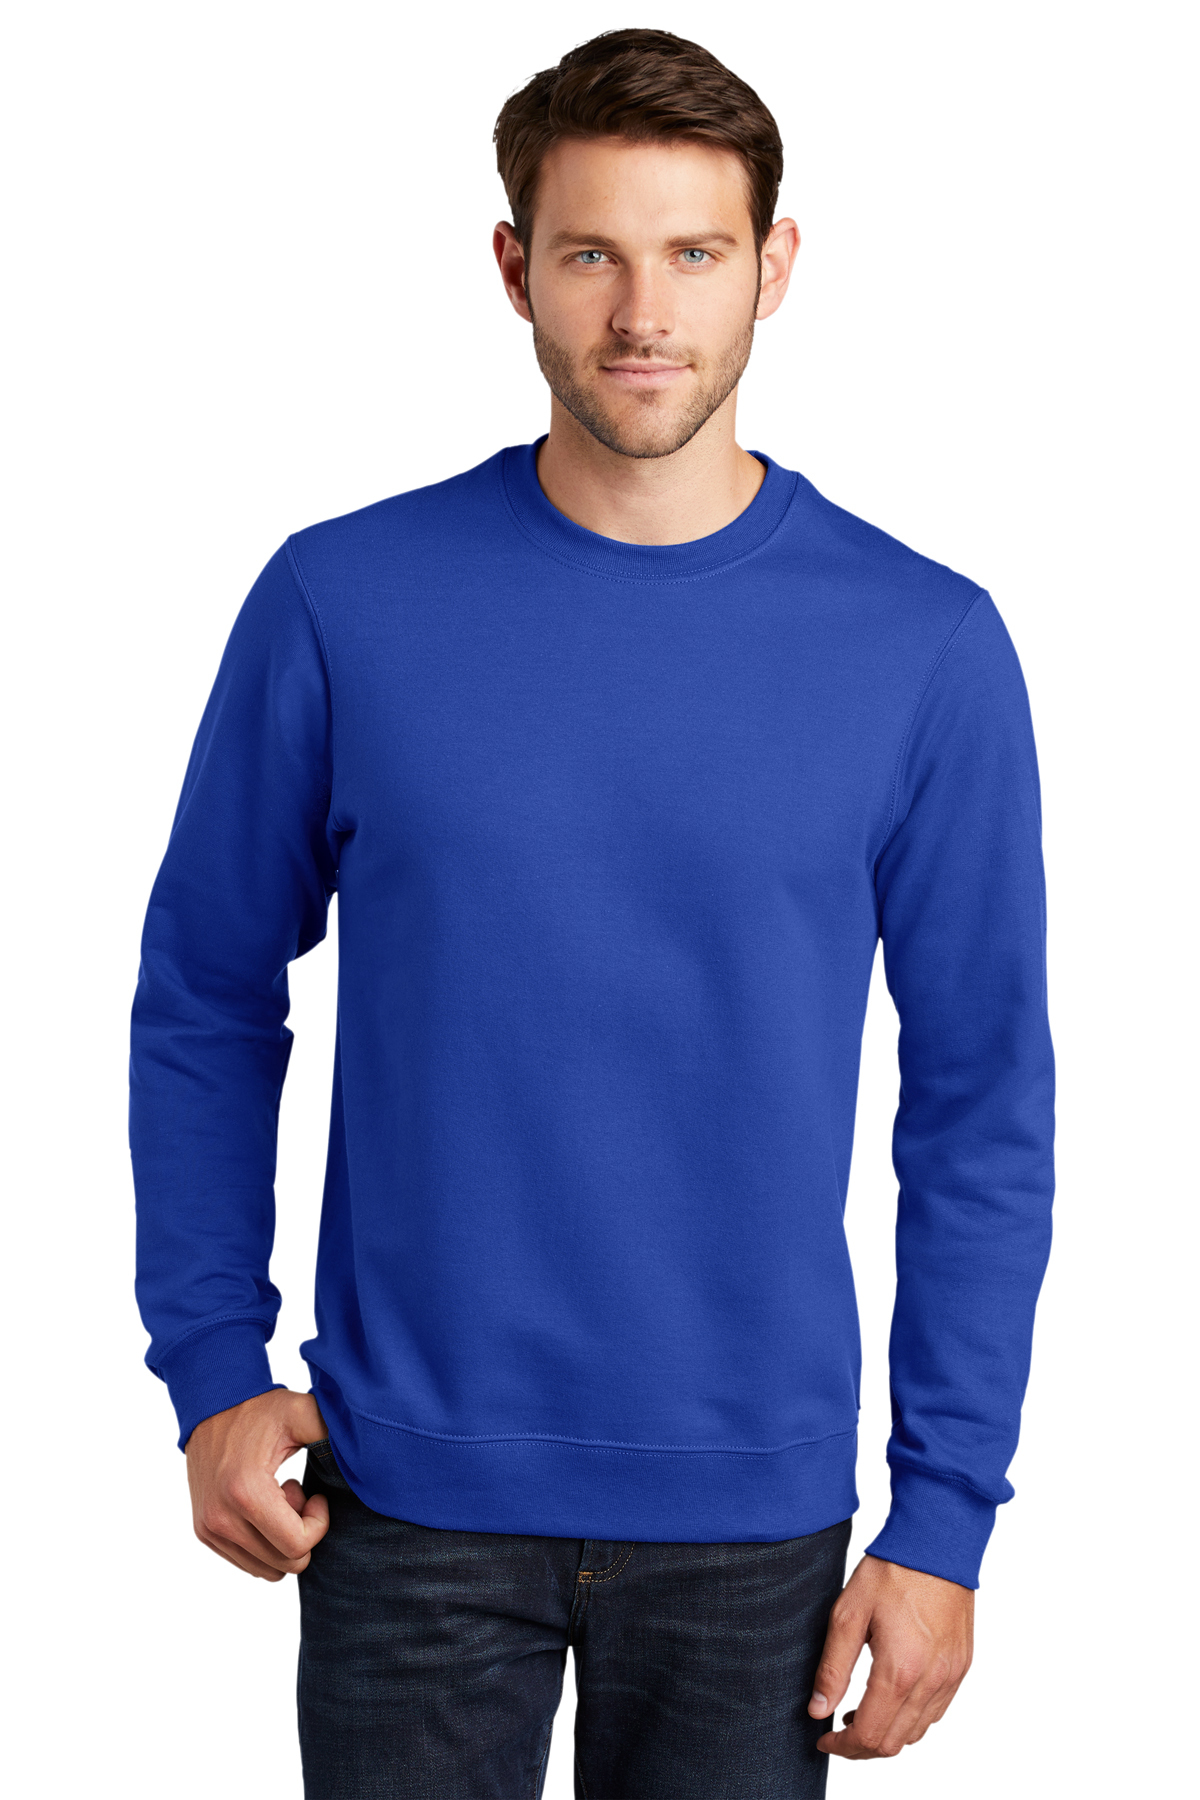 security Equivalent Twisted royal blue crew neck tournament Hearing  Halloween